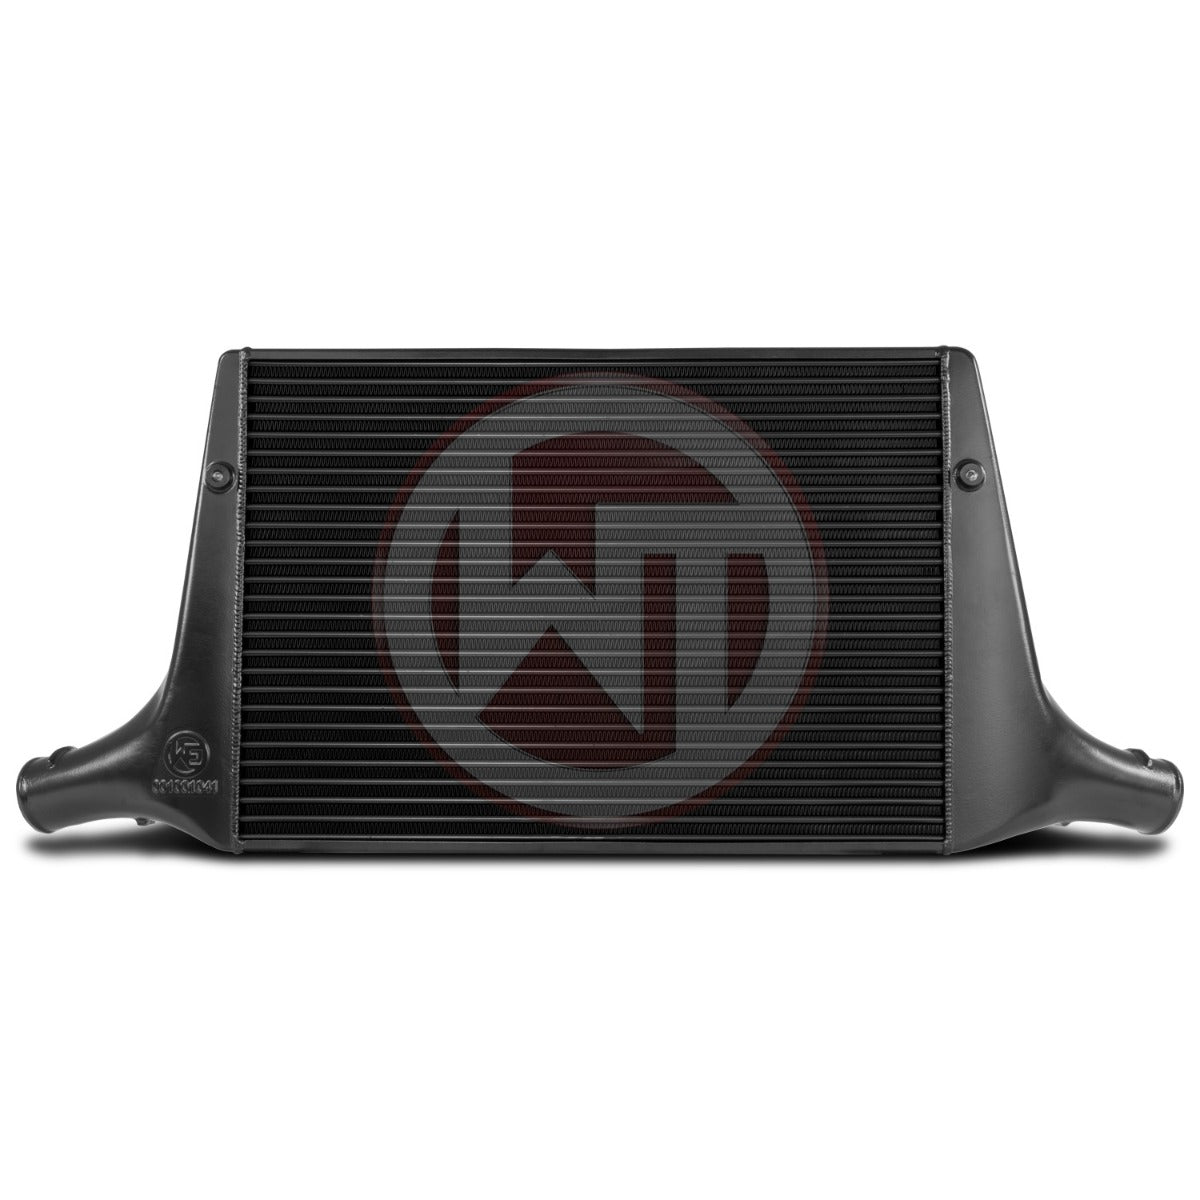 Wagner Tuning Audi A4 & A5 B8.5 2.0 TDI Competition Intercooler Kit